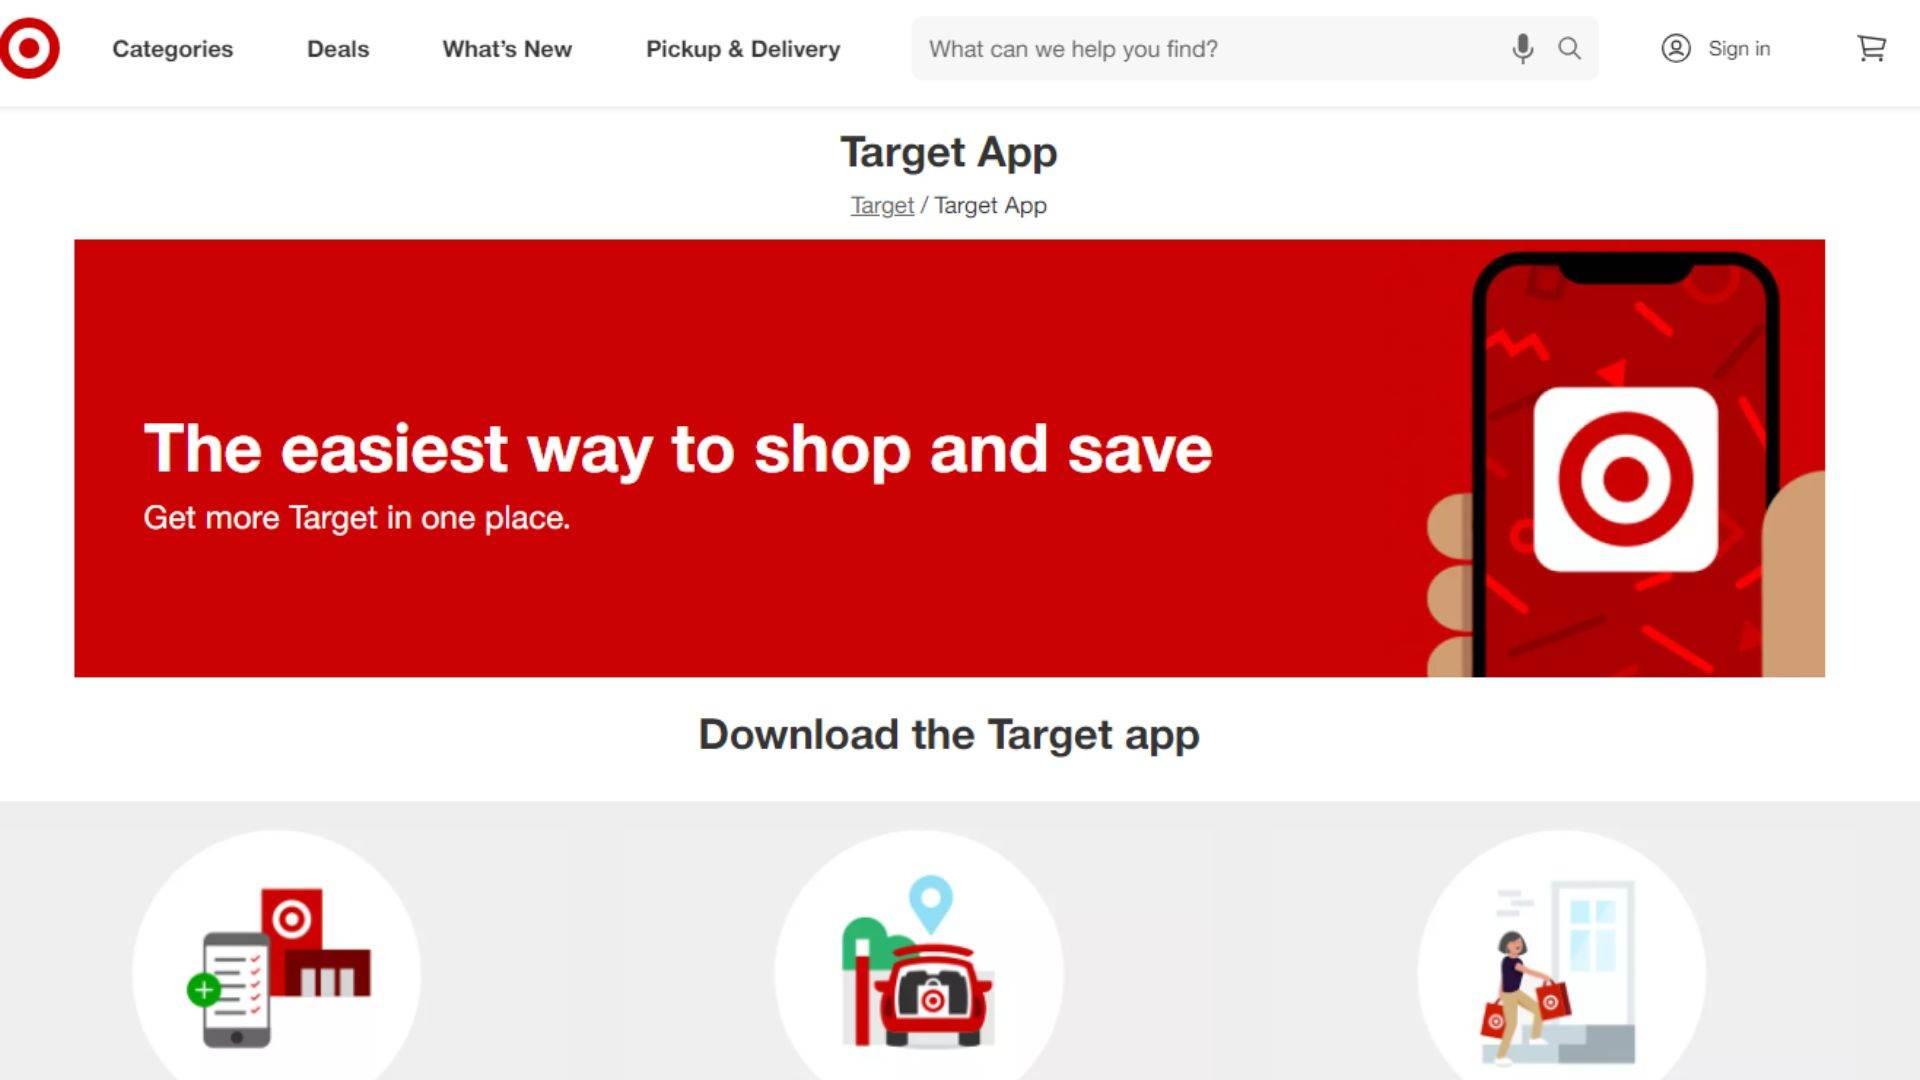 What is a Target App?